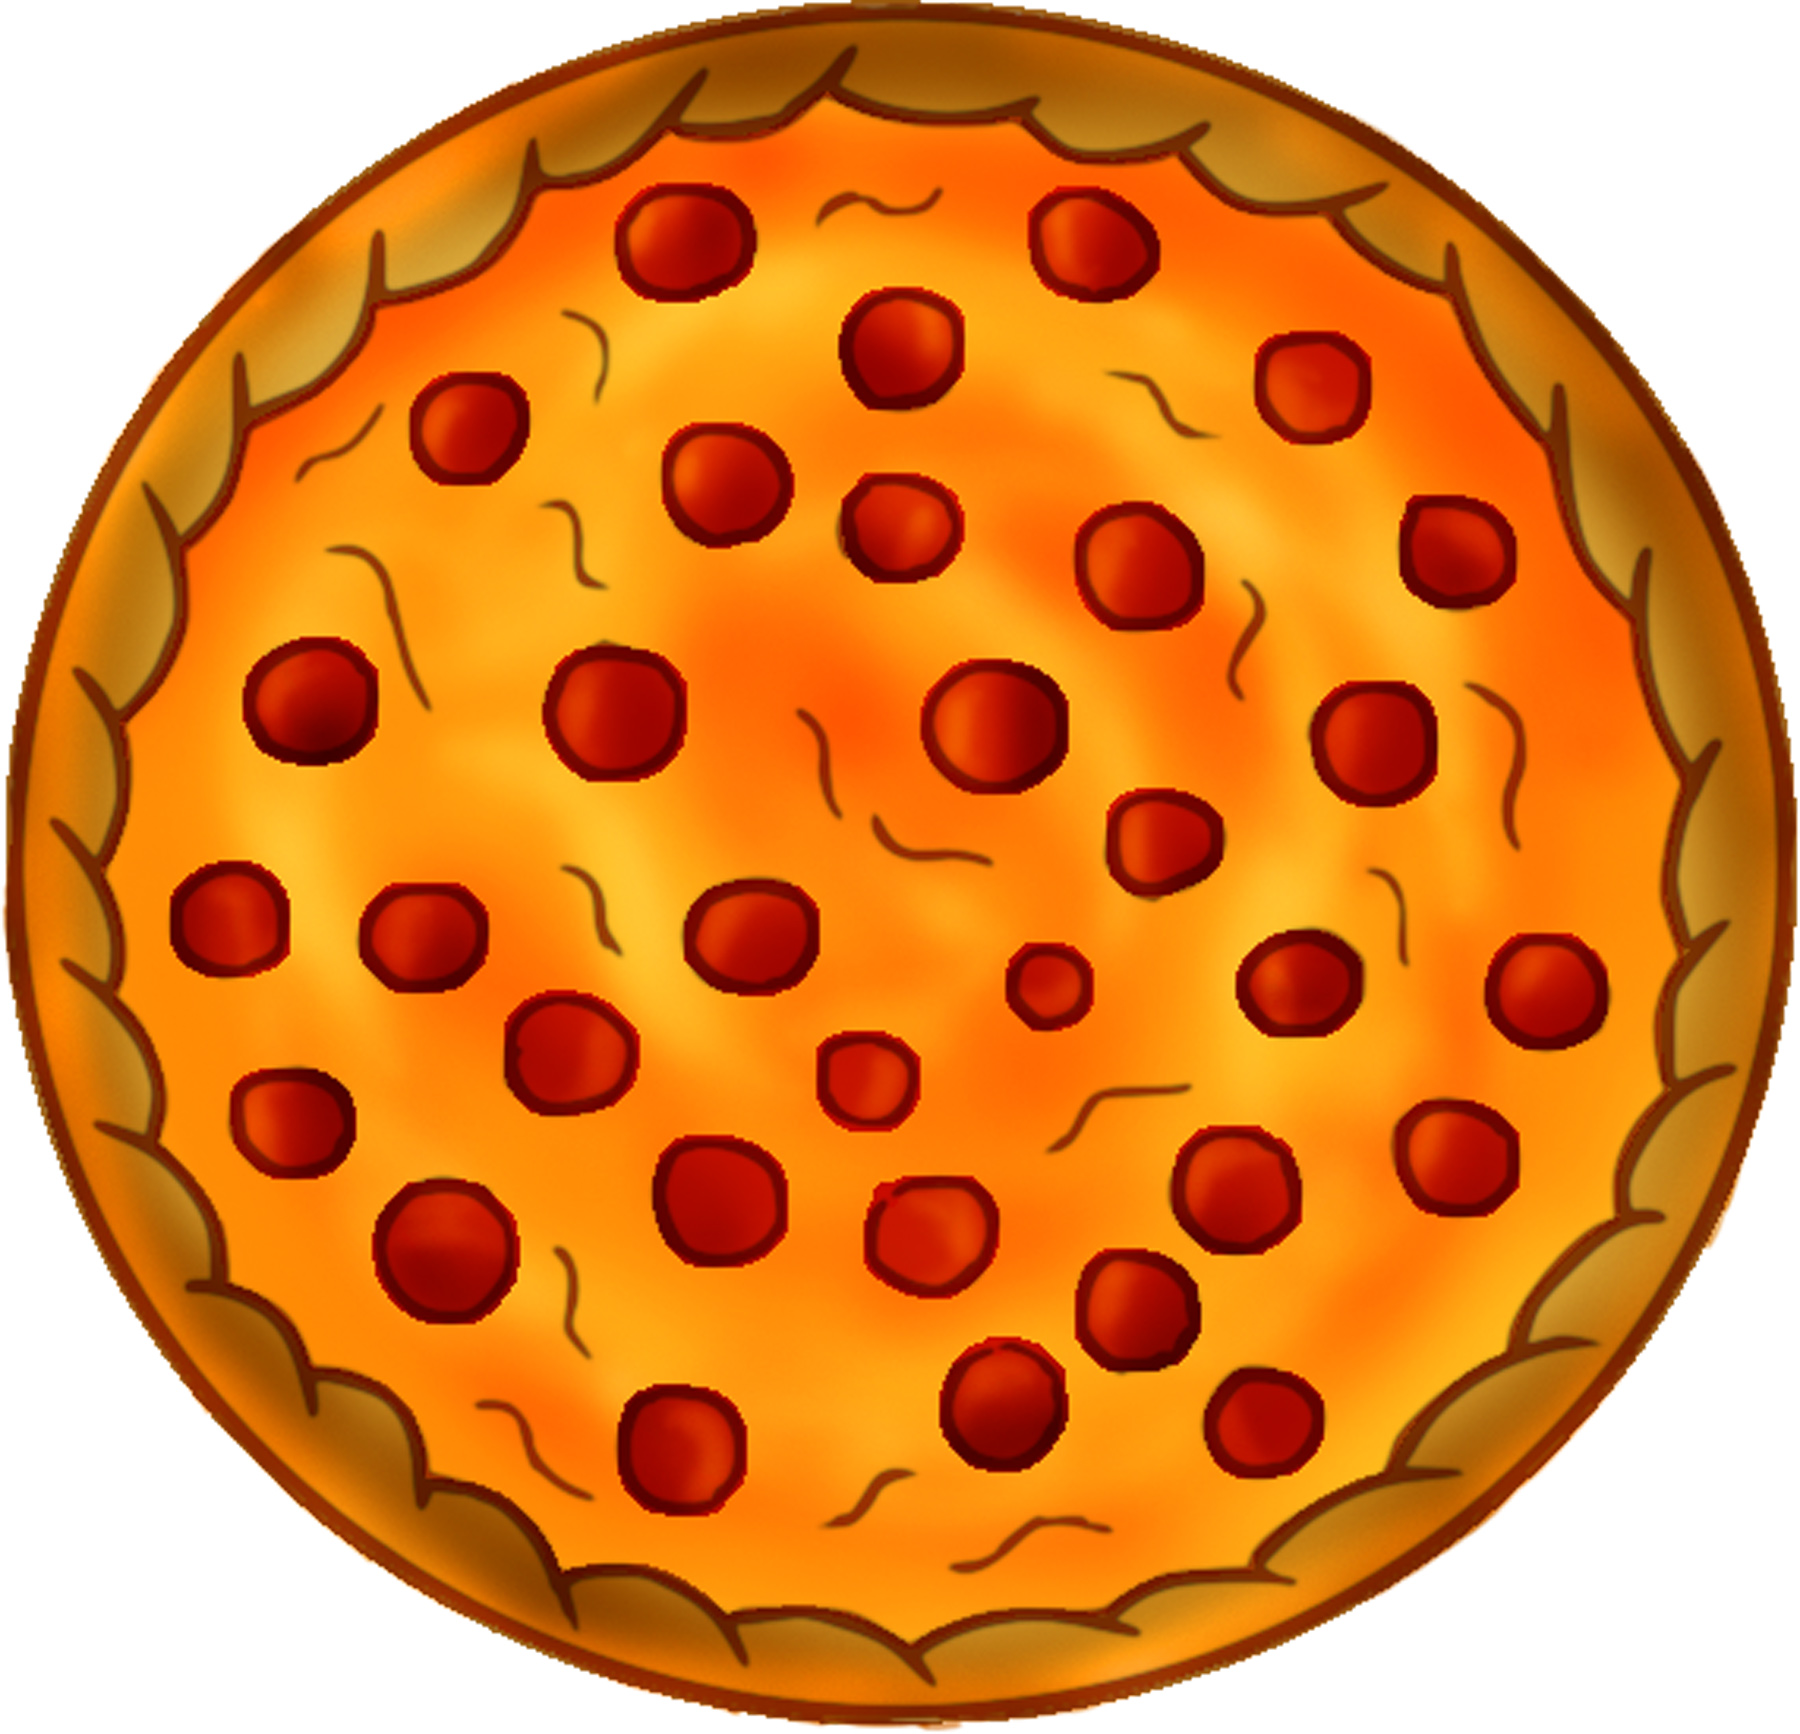 free clipart images pizza - photo #41